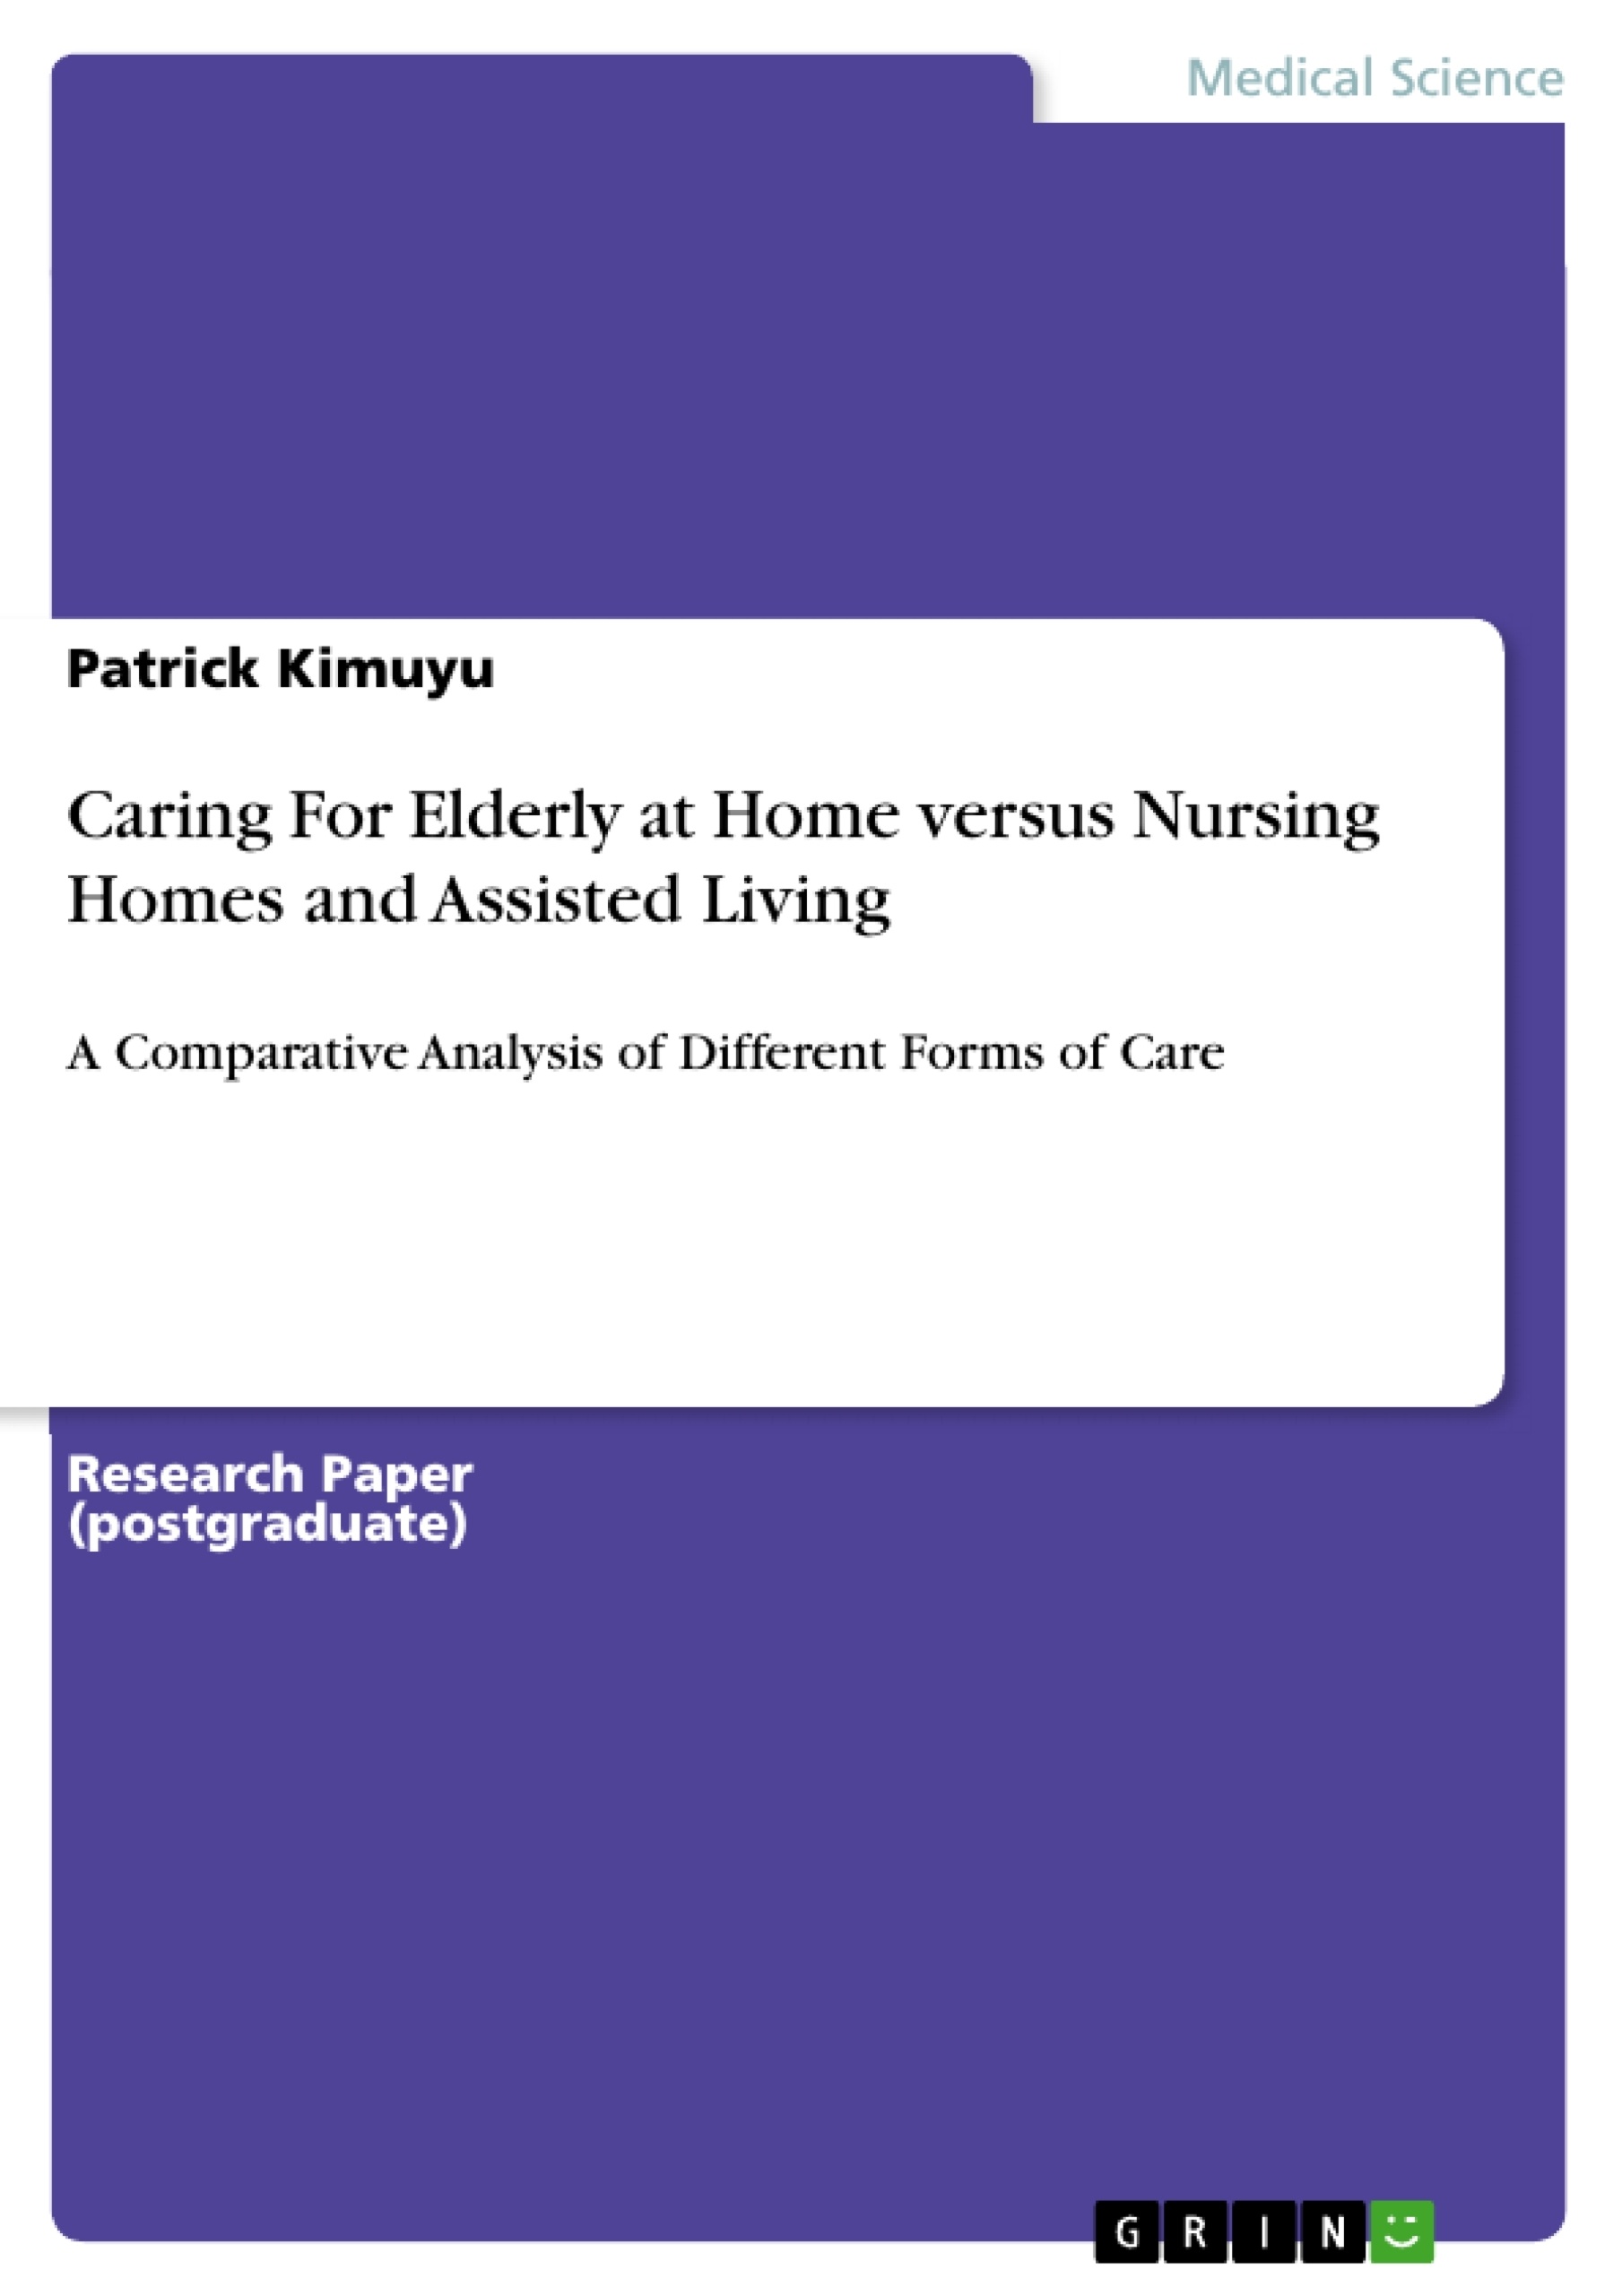 Título: Caring For Elderly at Home versus Nursing Homes and Assisted Living